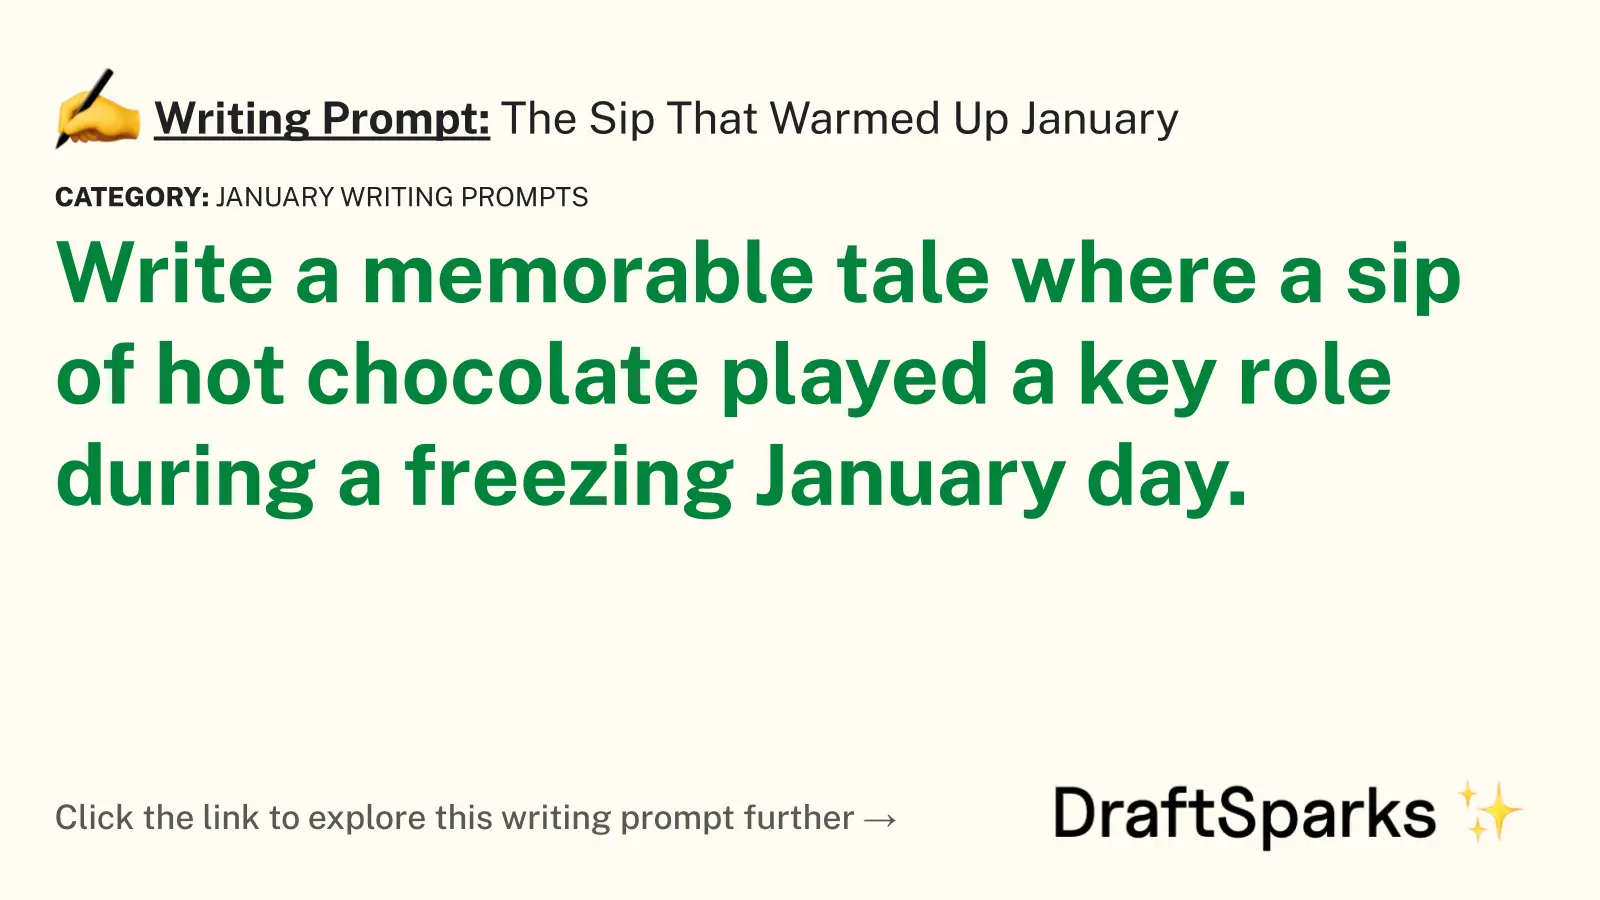 The Sip That Warmed Up January